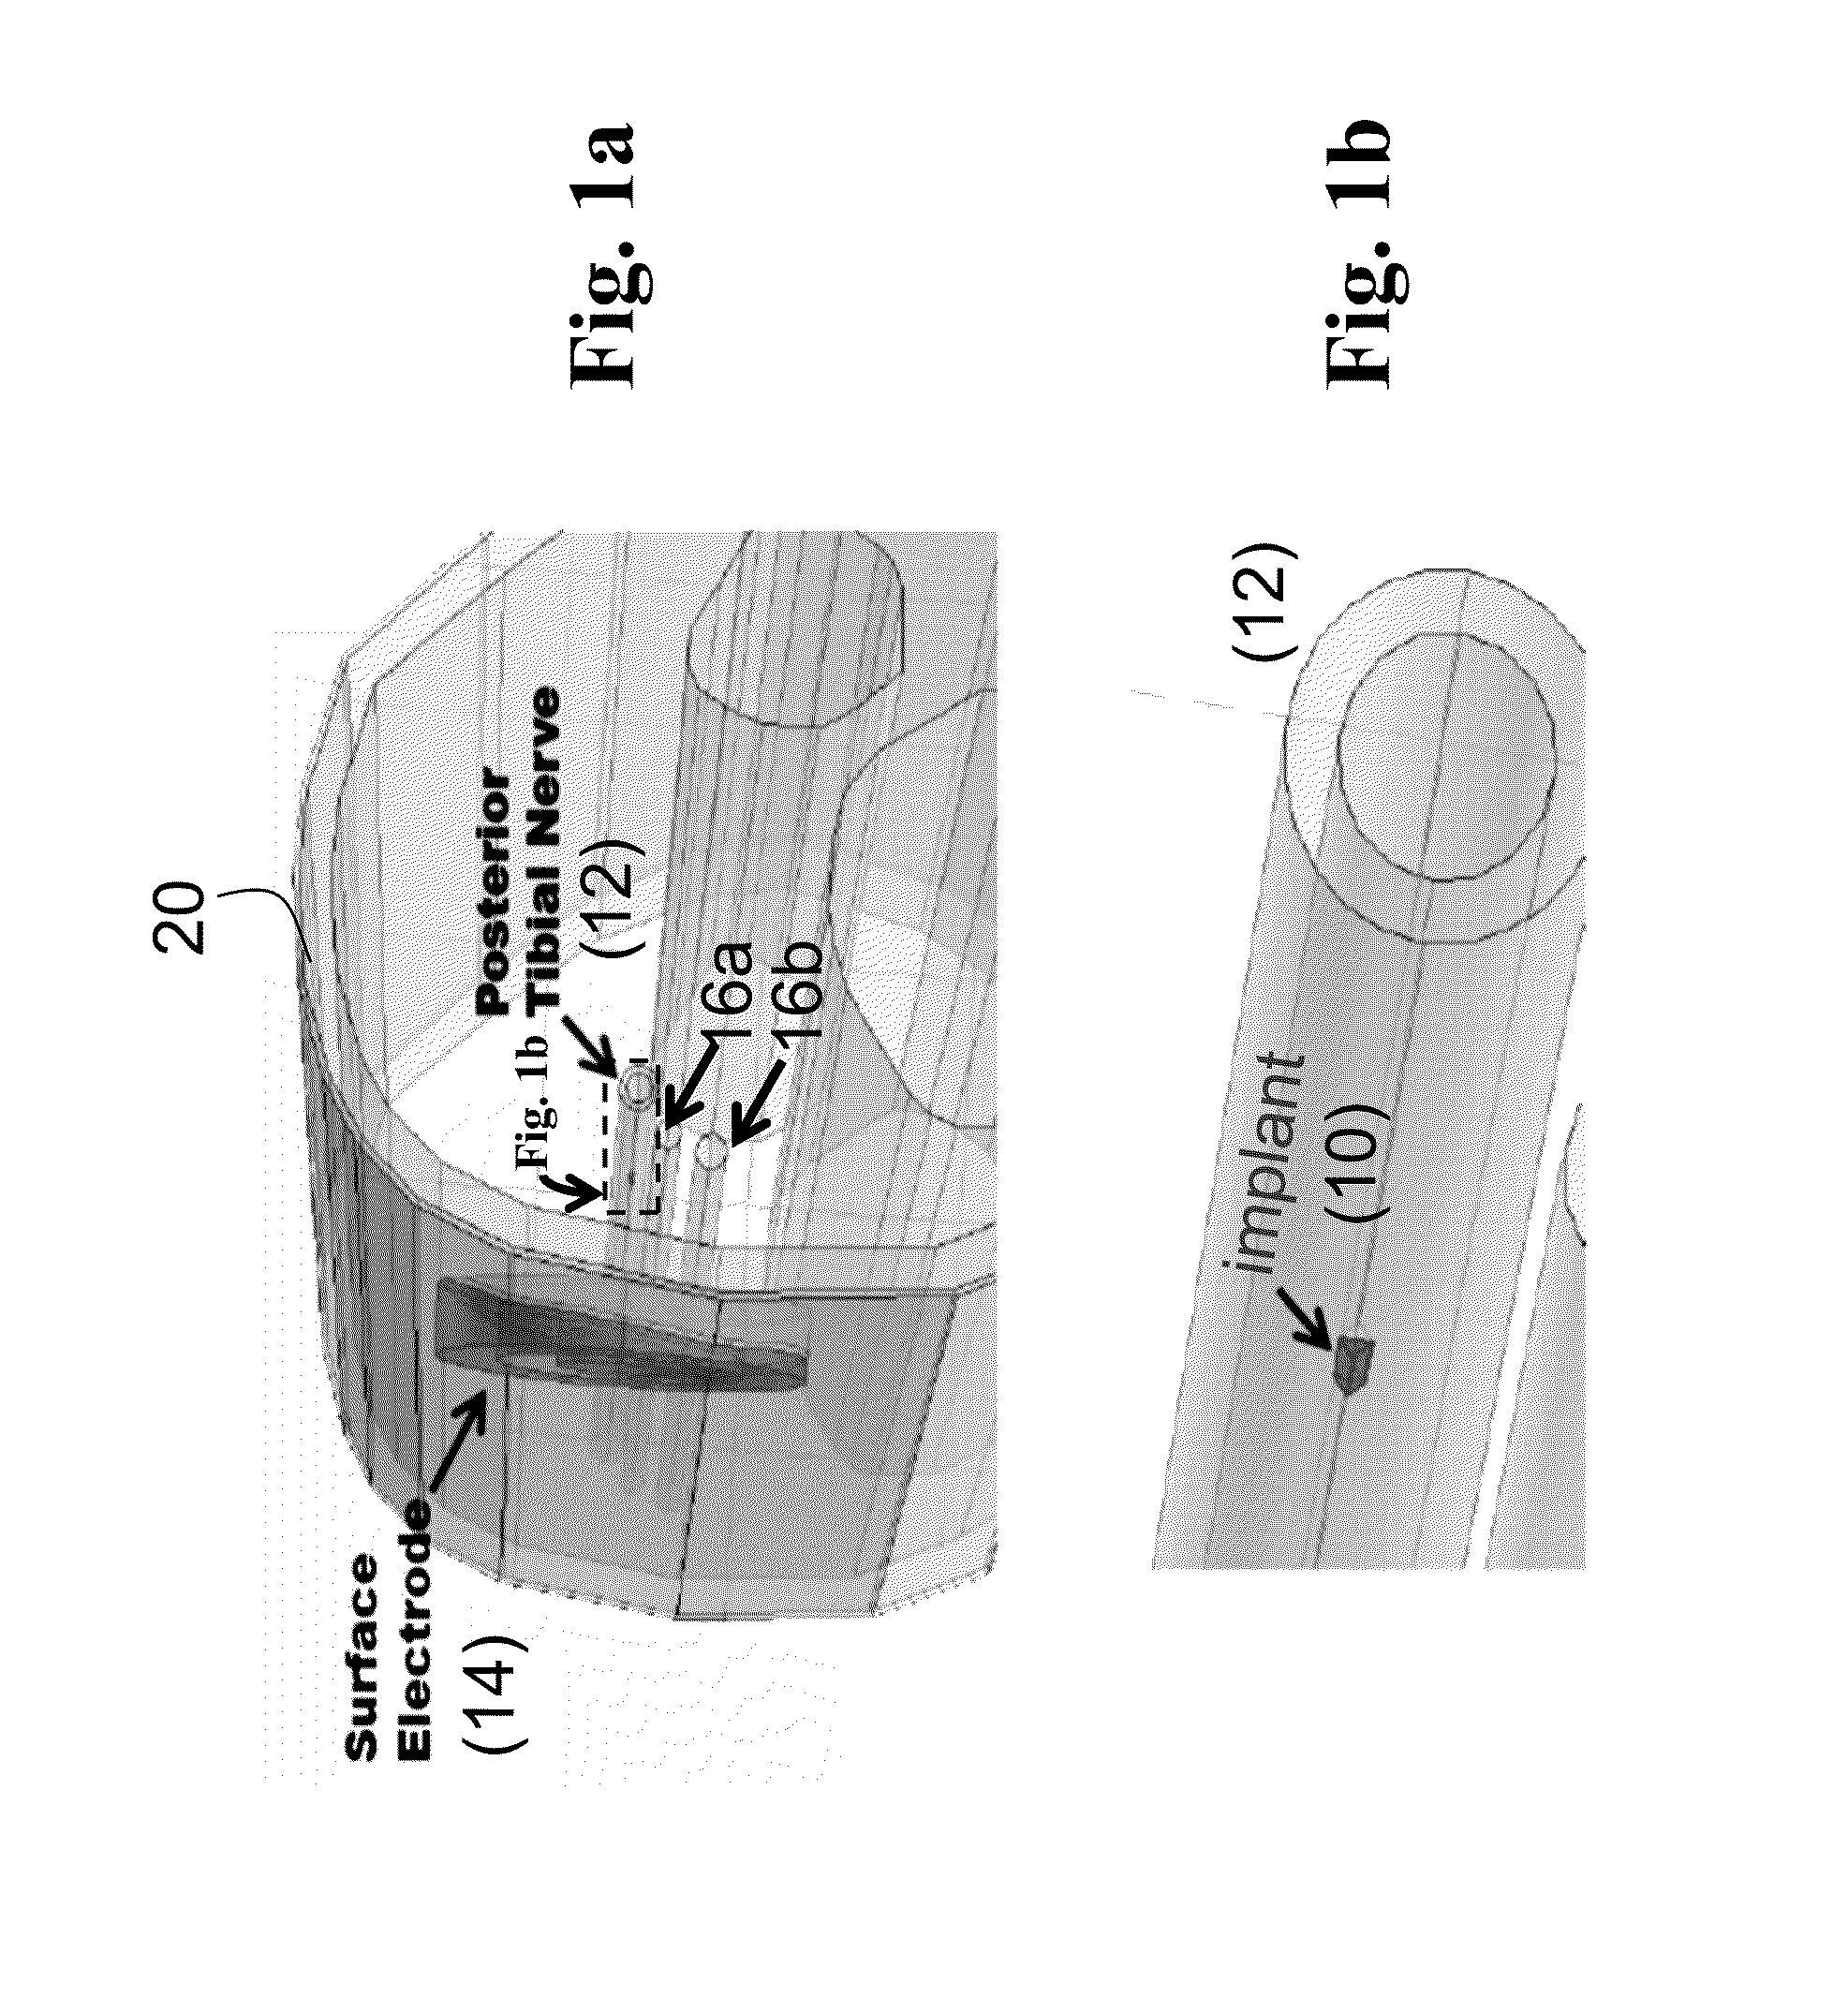 Systems and methods of enhancing electrical activation of nervous tissue